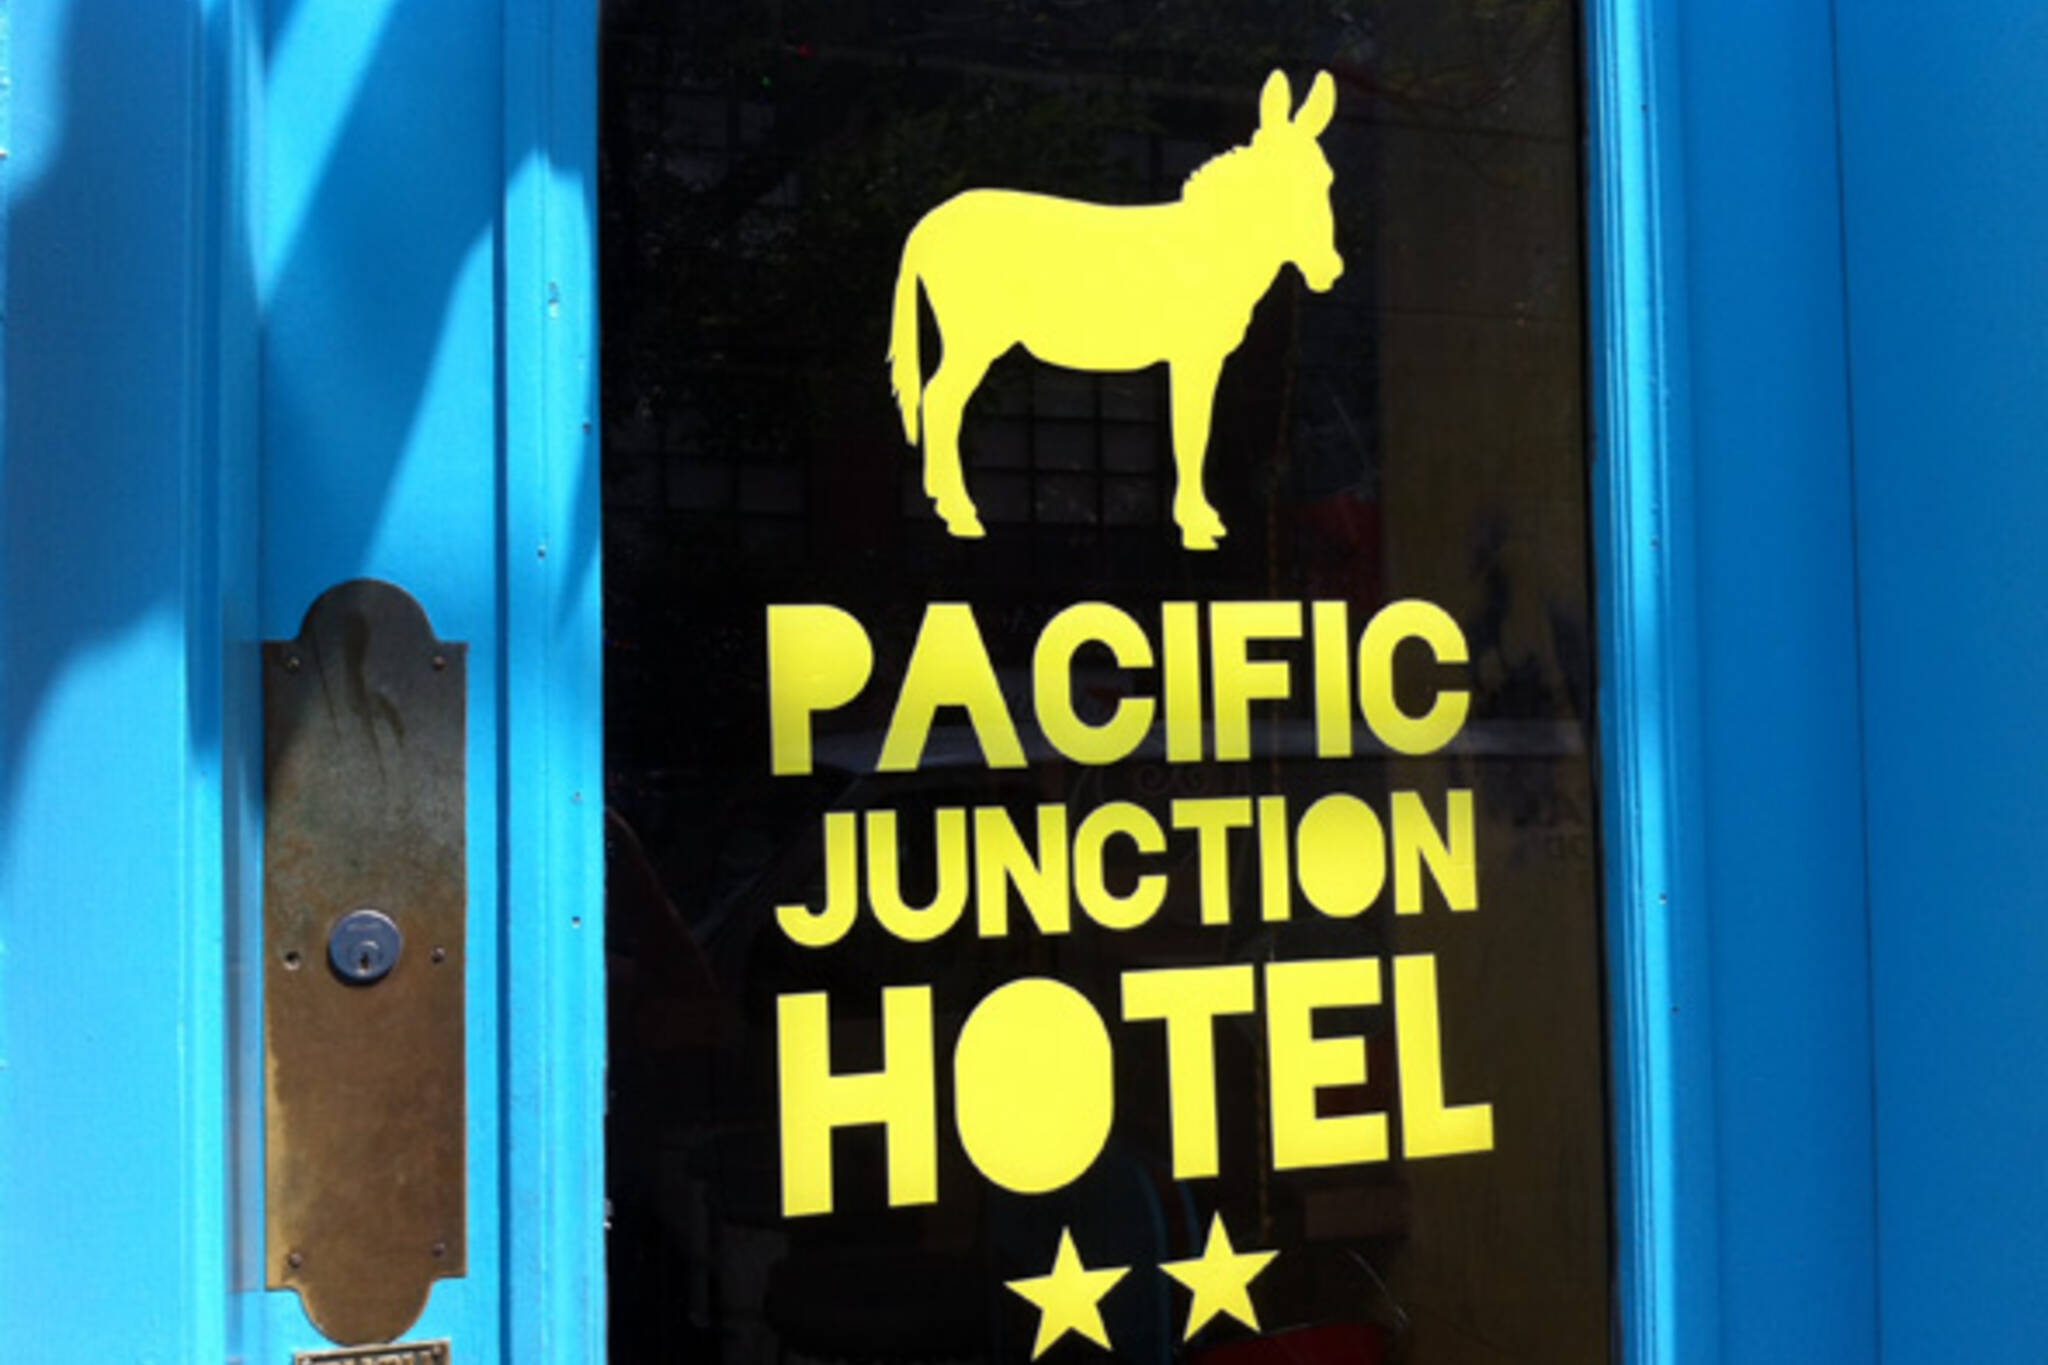 Pacific Junction Hotel